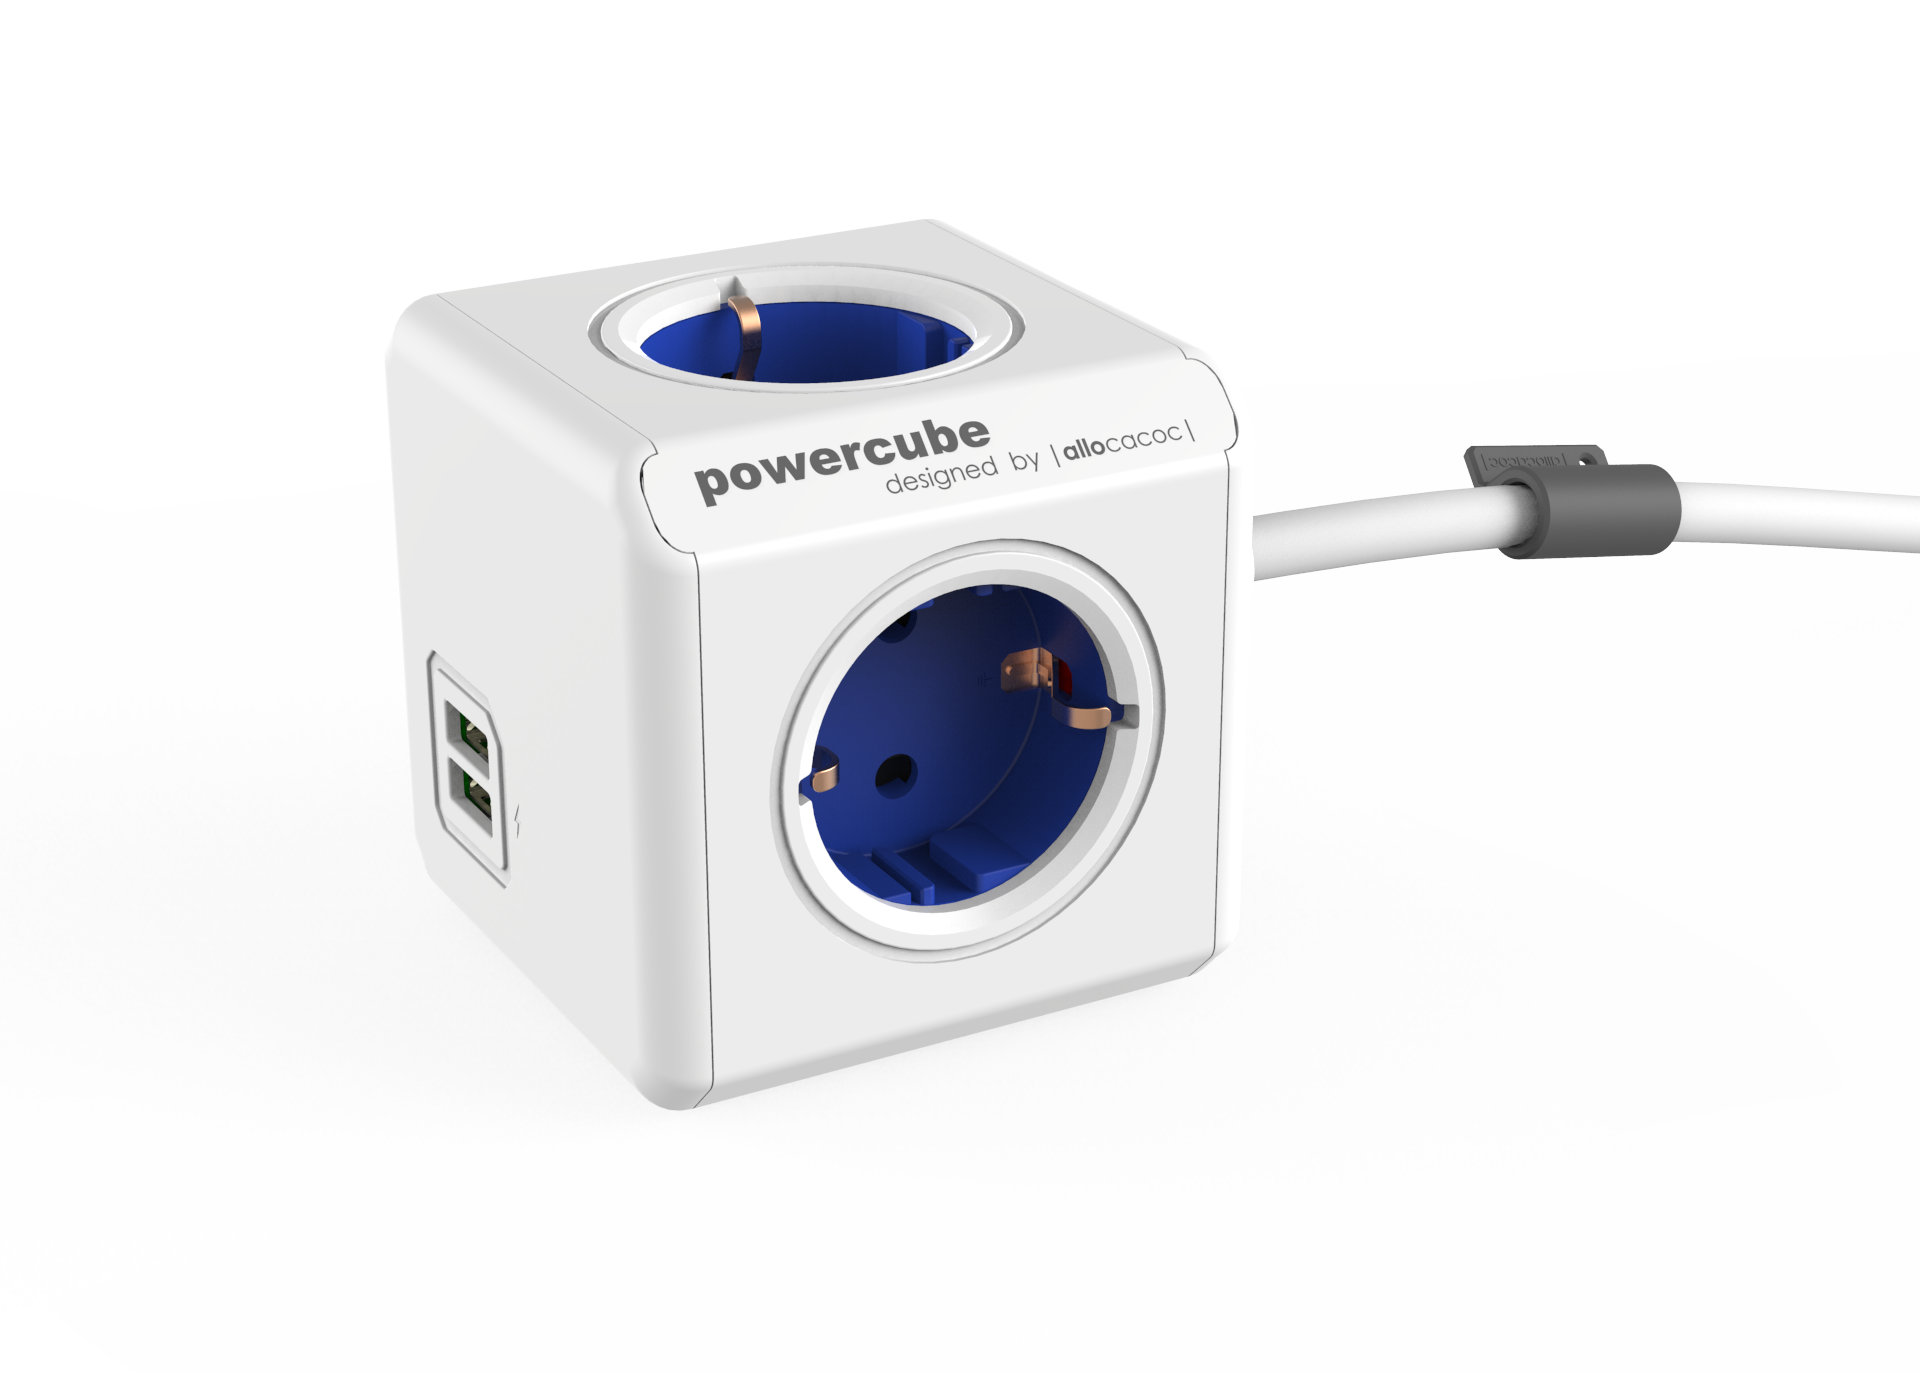 ALLOCACOC PowerCube DuoUSB Extended Mehrfachstecker mit USB-Ladefunktion